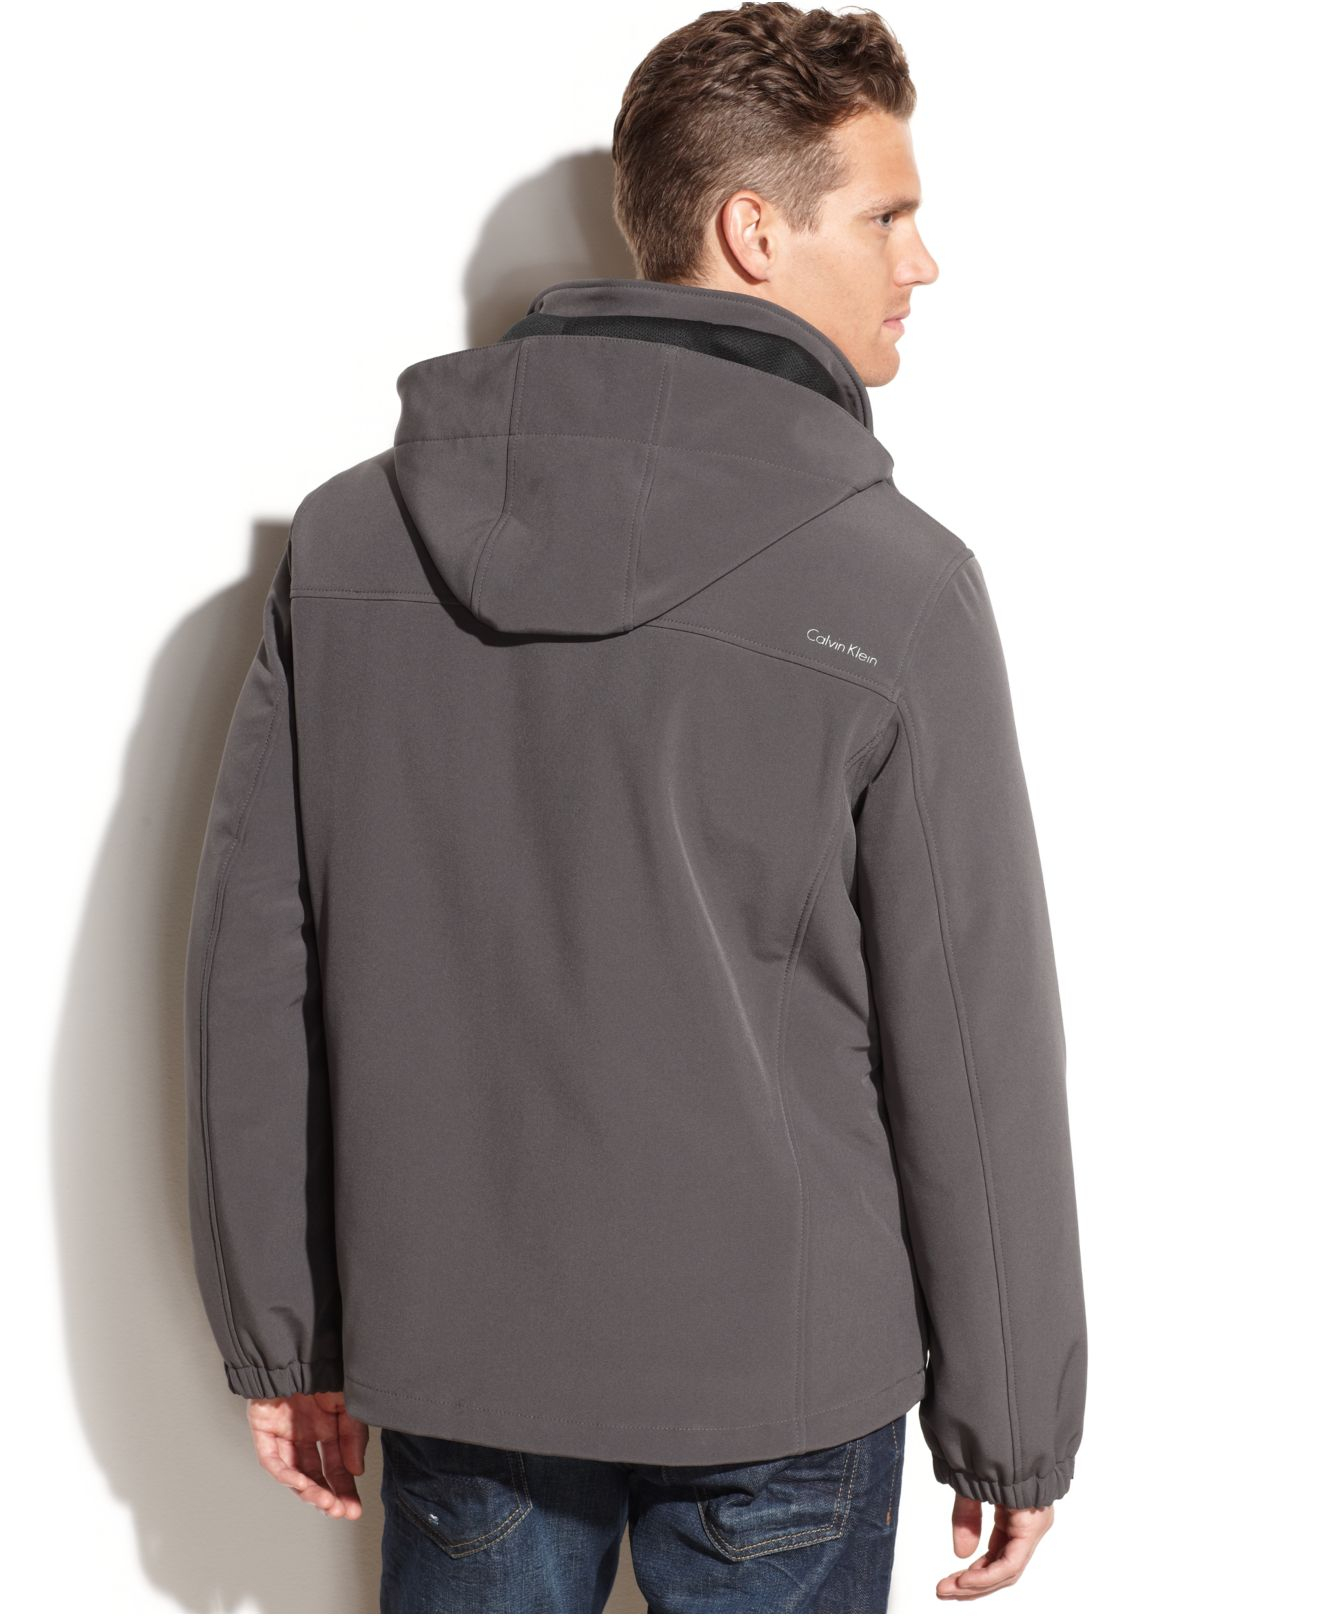 Calvin Klein Hooded Soft-Shell 3-In-1 Systems Jacket in Smoke 